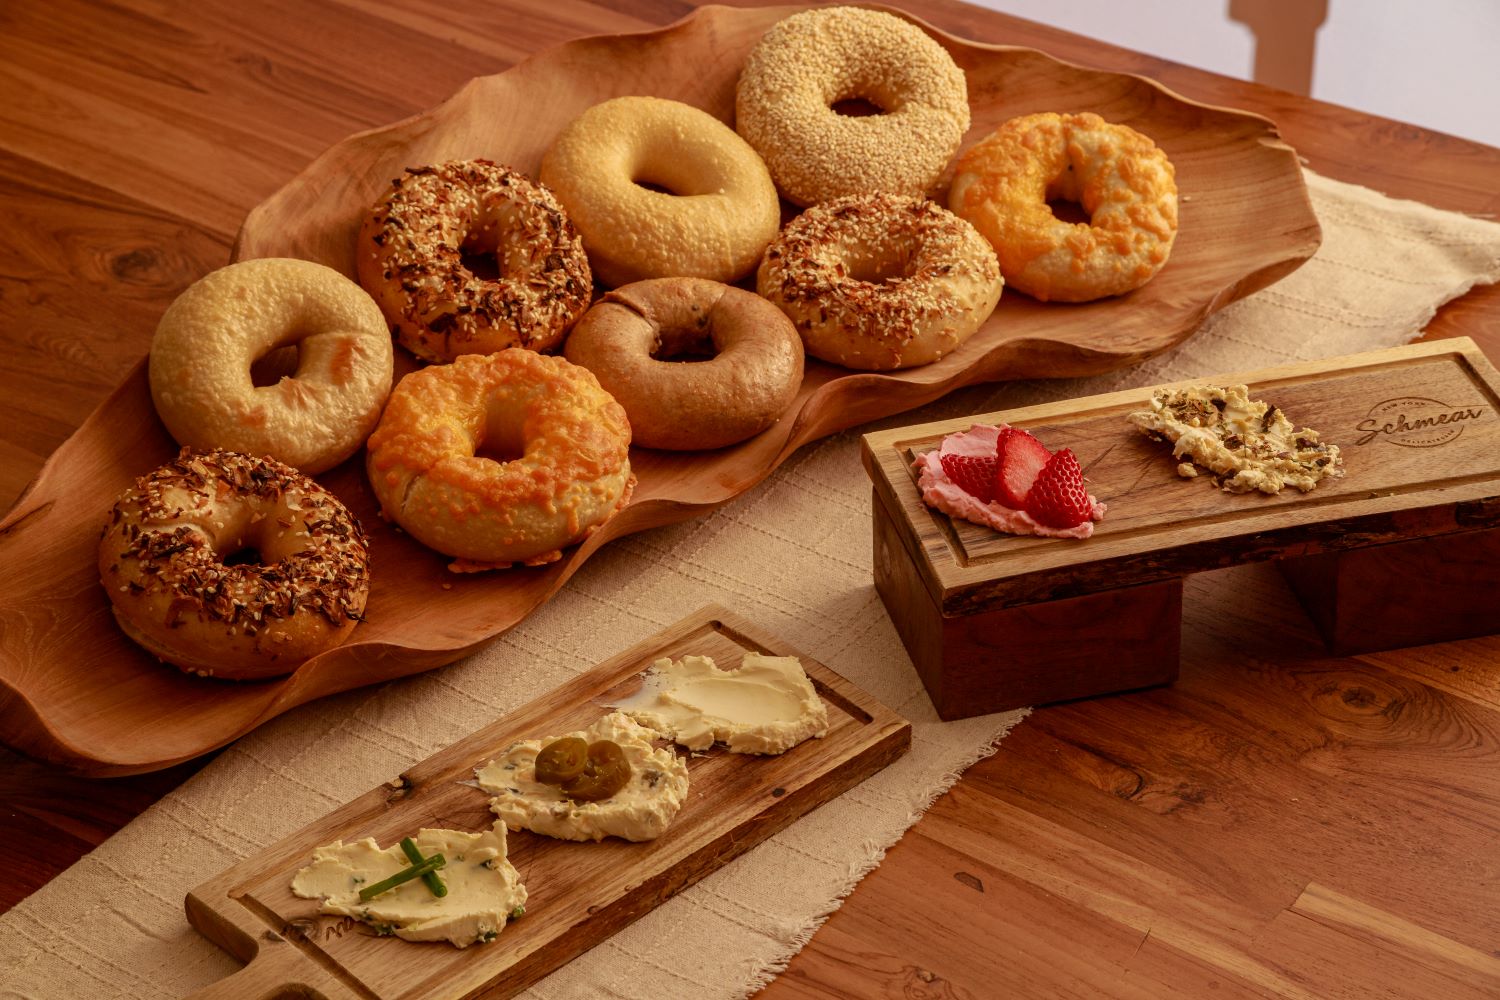 Schmear Bagels by Monument Lifestyle